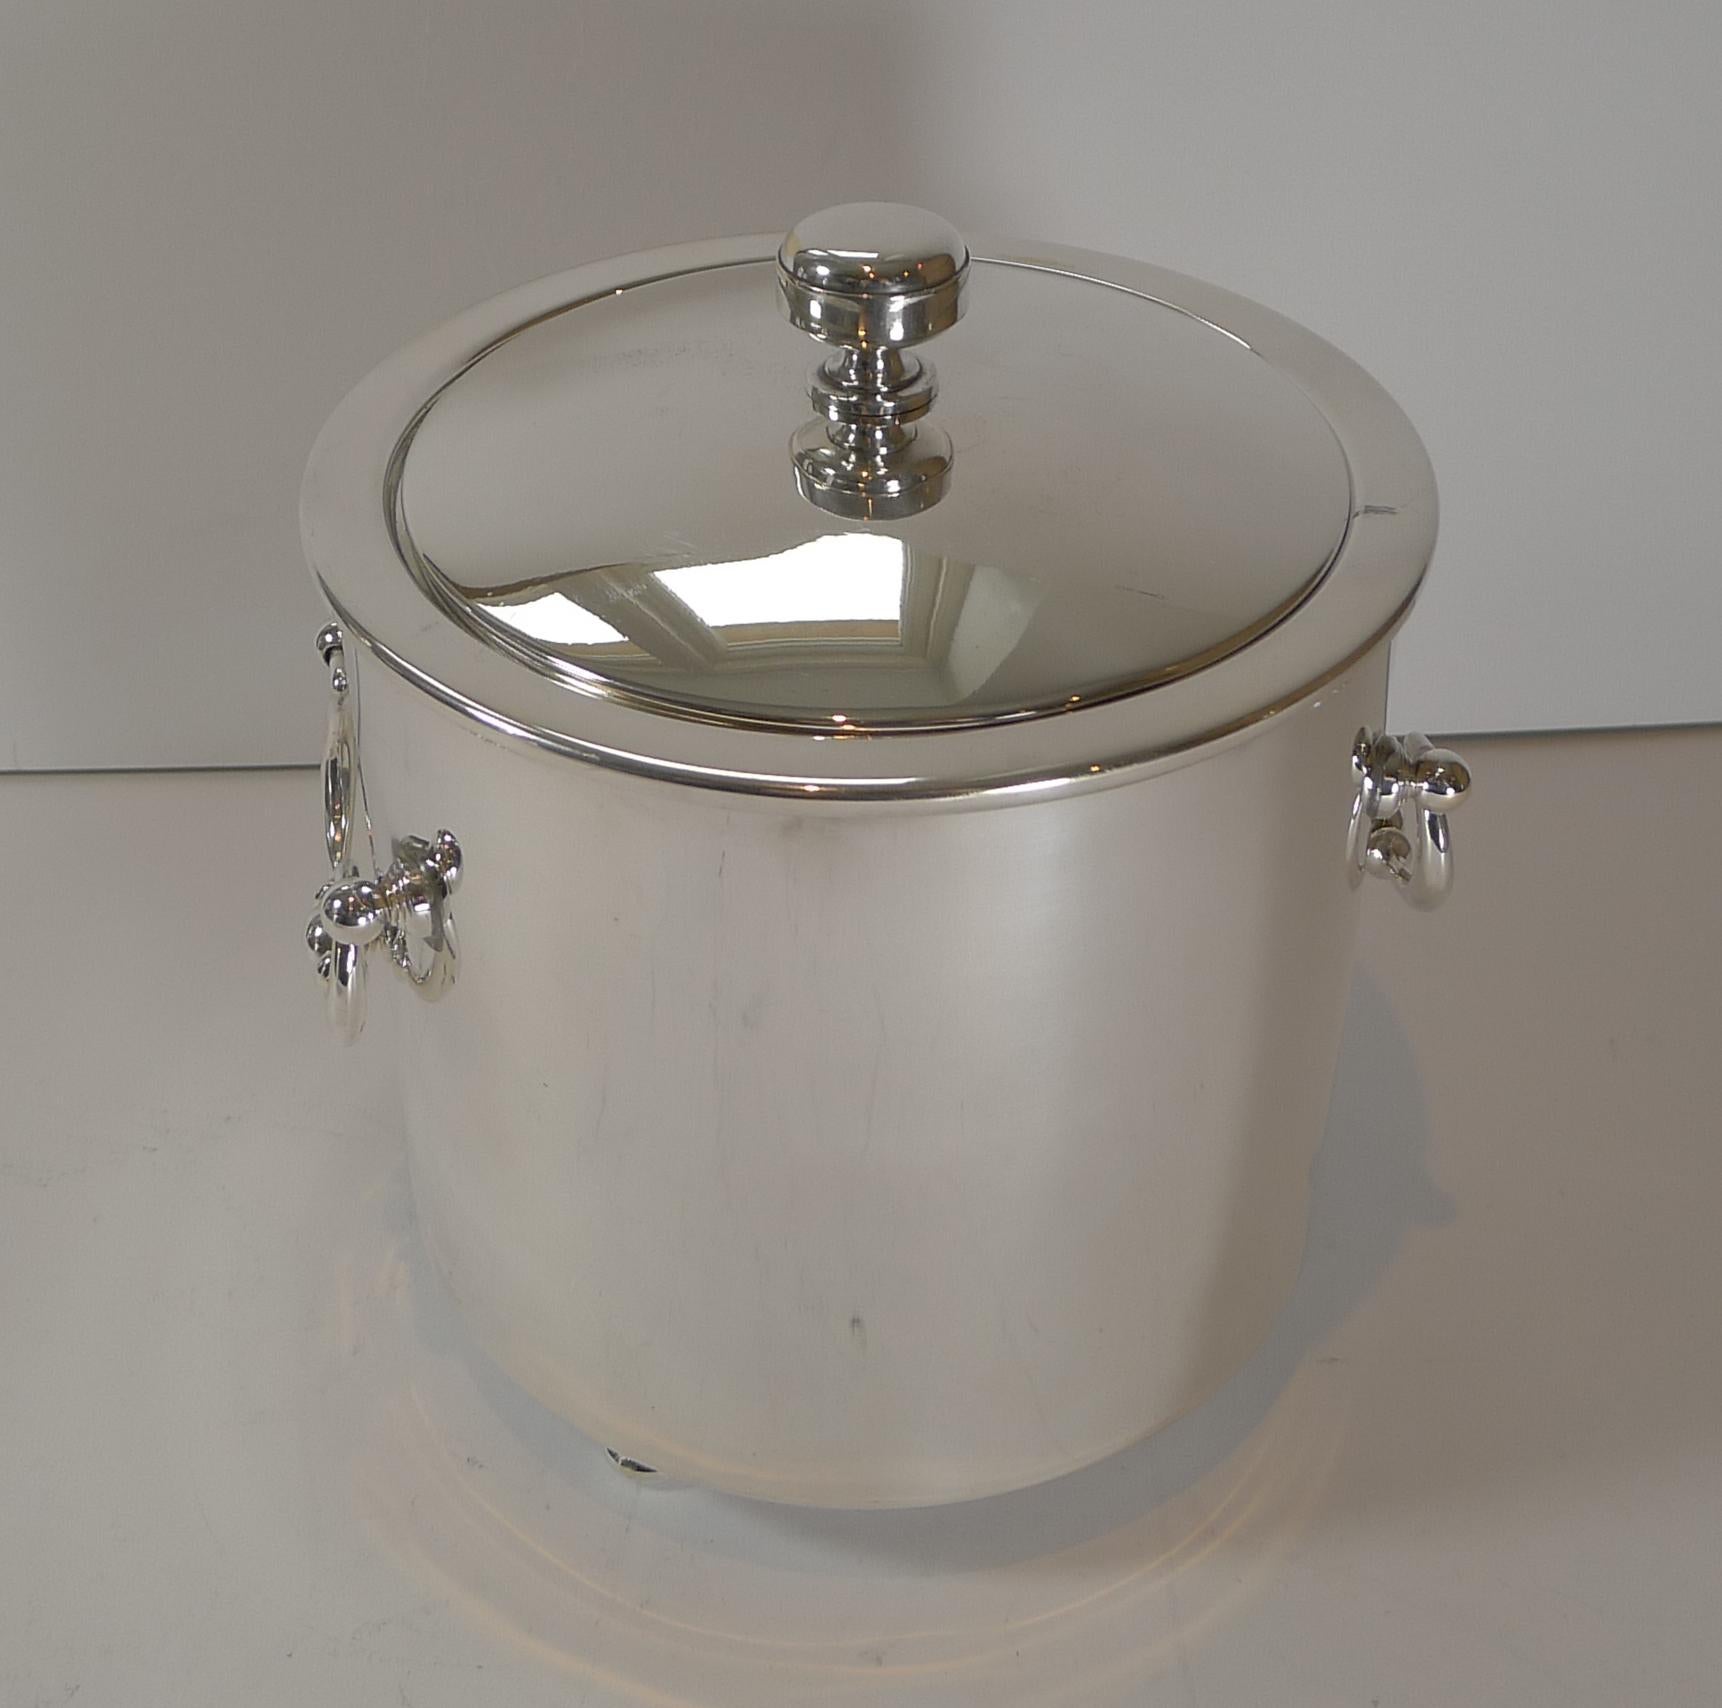 Christofle Gallia, Paris, Silver Plated Insulated Ice Bucket 1